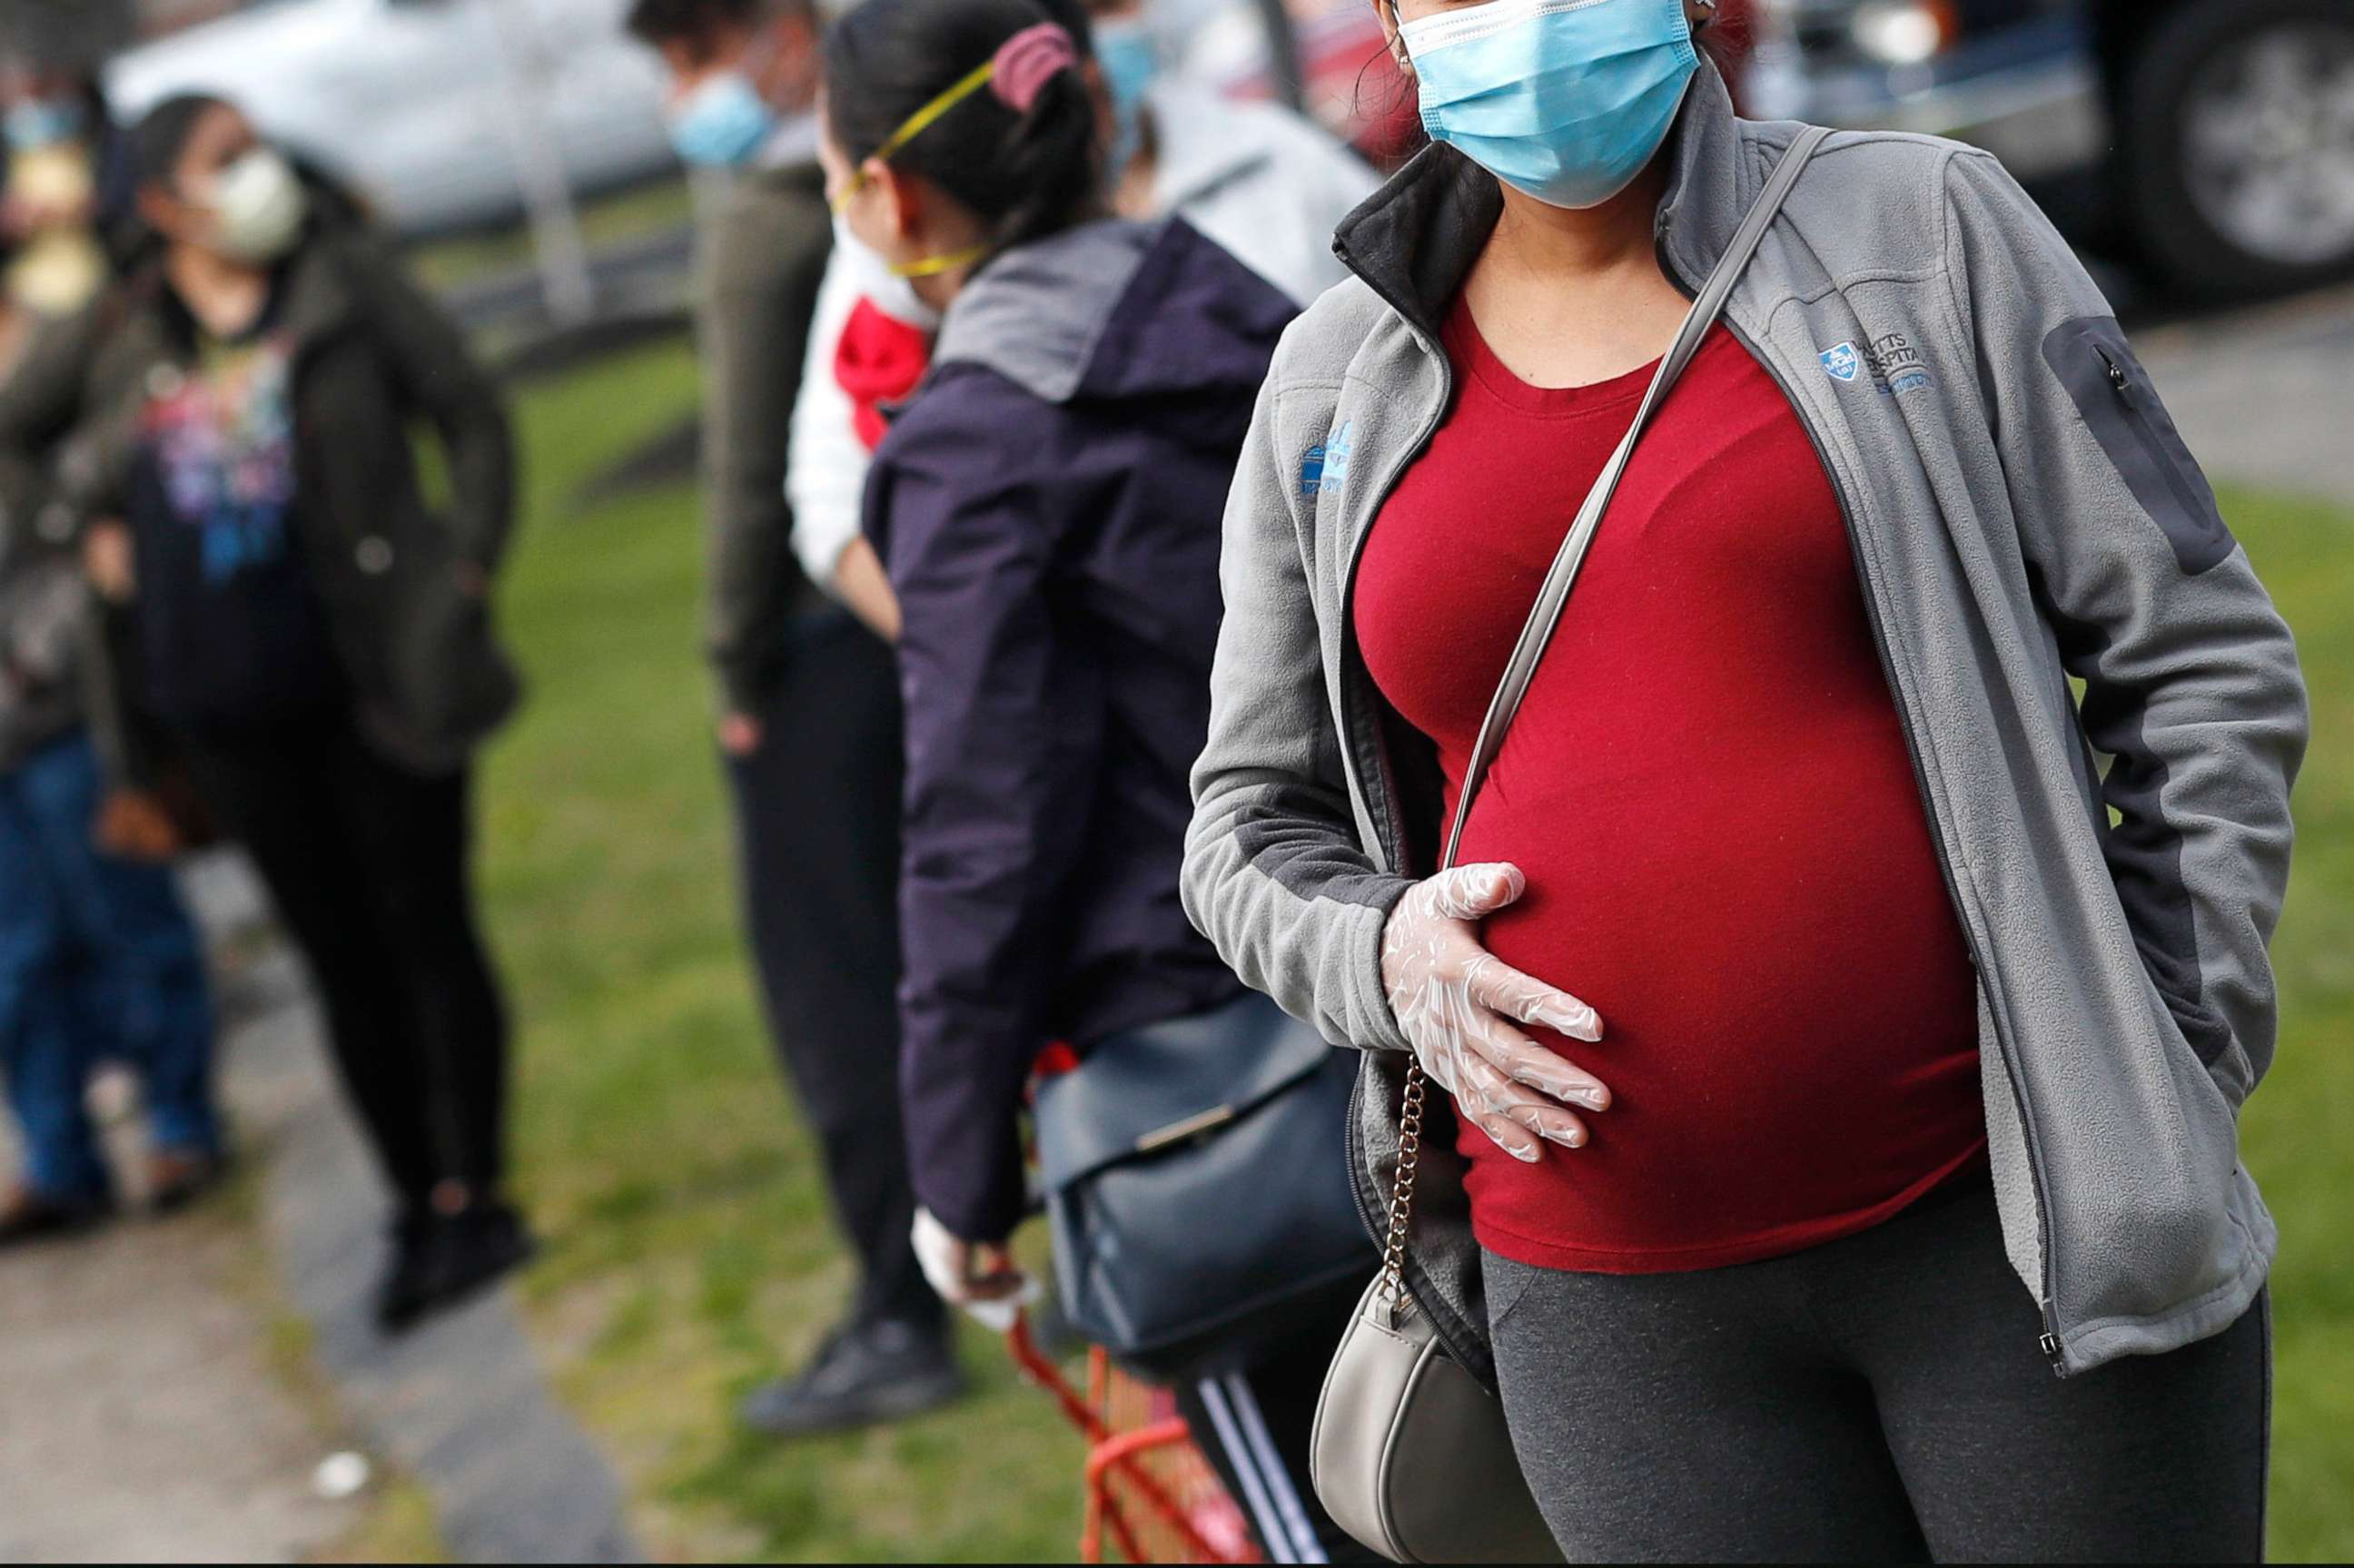 PHOTO: A pregnant woman waits in a food pantry line at St. Mary's Church in Waltham, Mass., for people in need of groceries due to the COVID-19 pandemic, May 7, 2020.